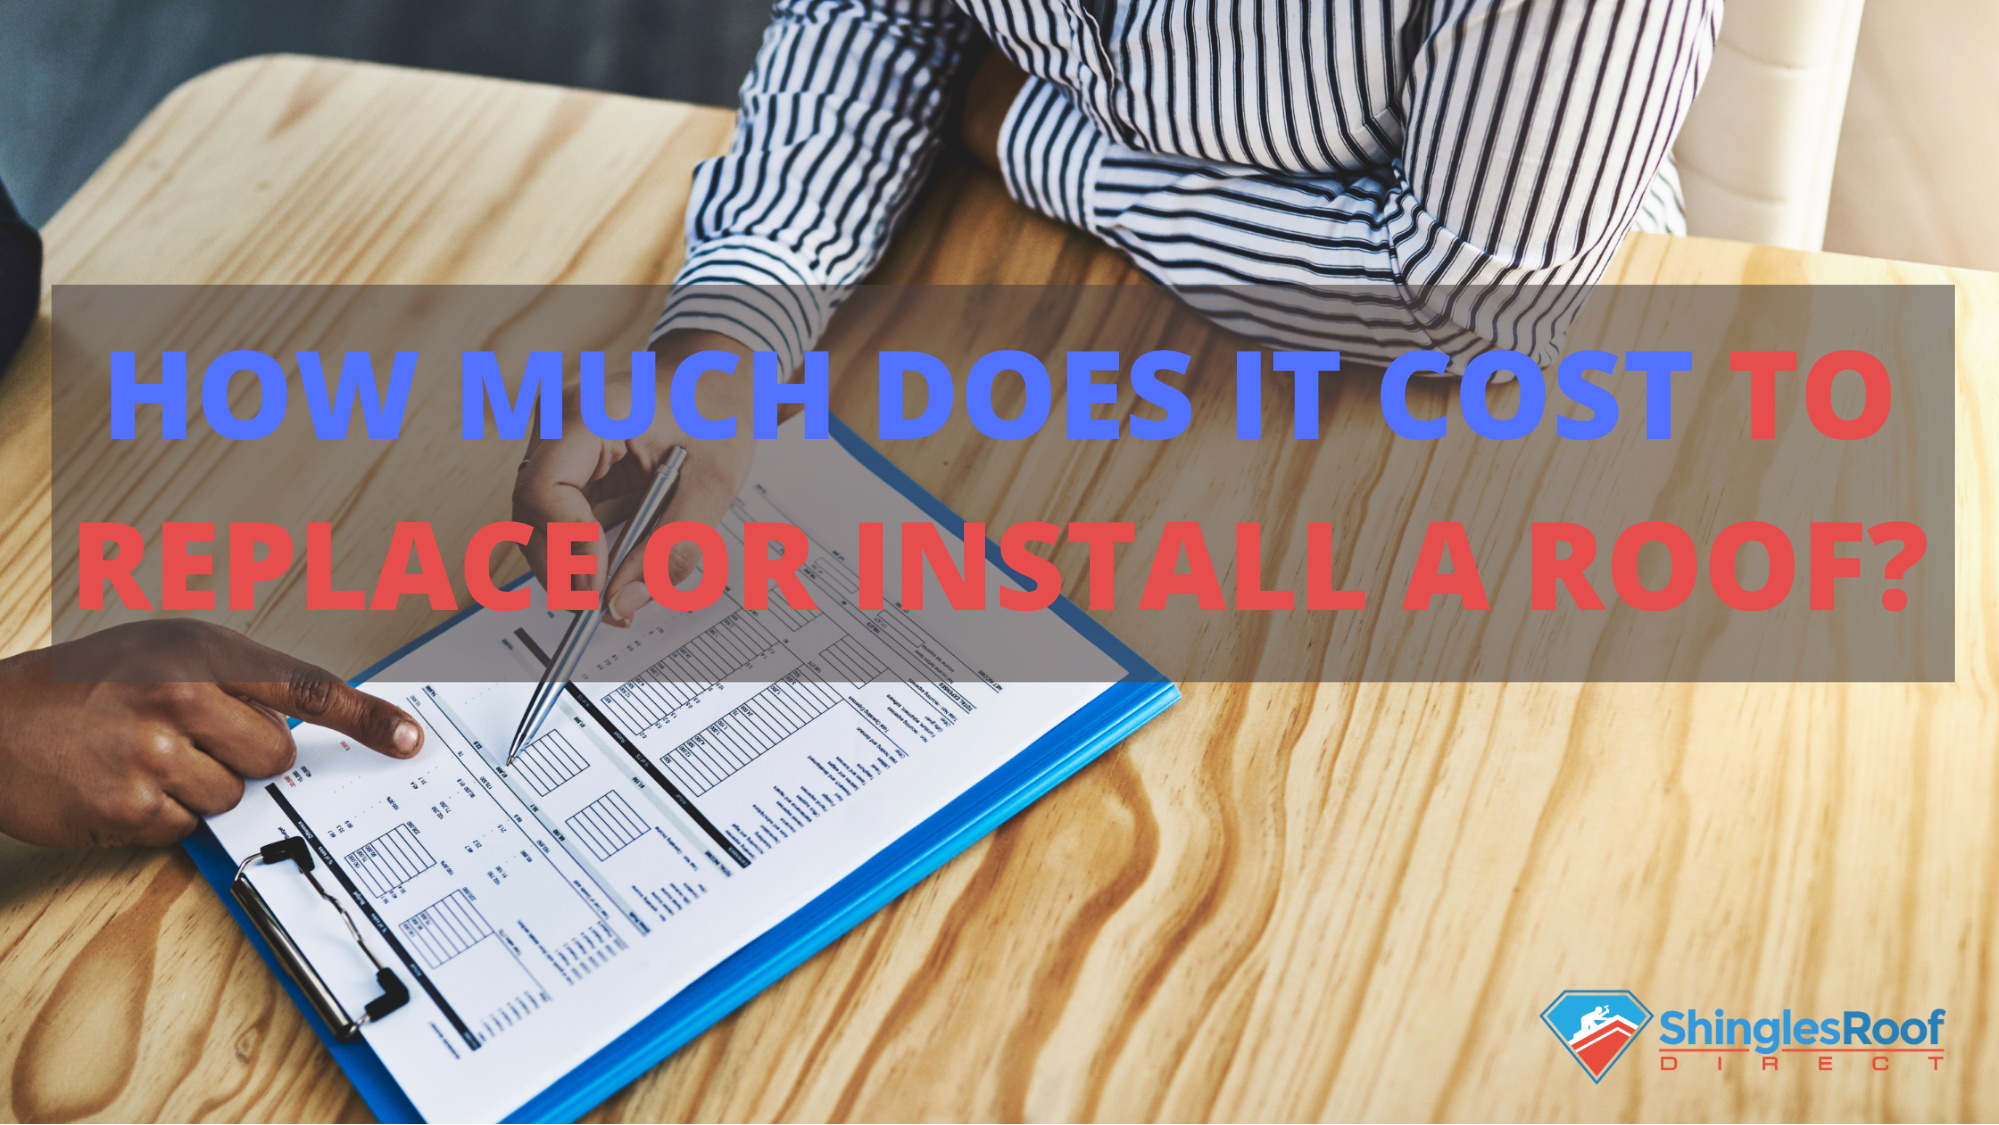 HOW MUCH DOES IT COST TO REPLACE OR INSTALL A ROOF?